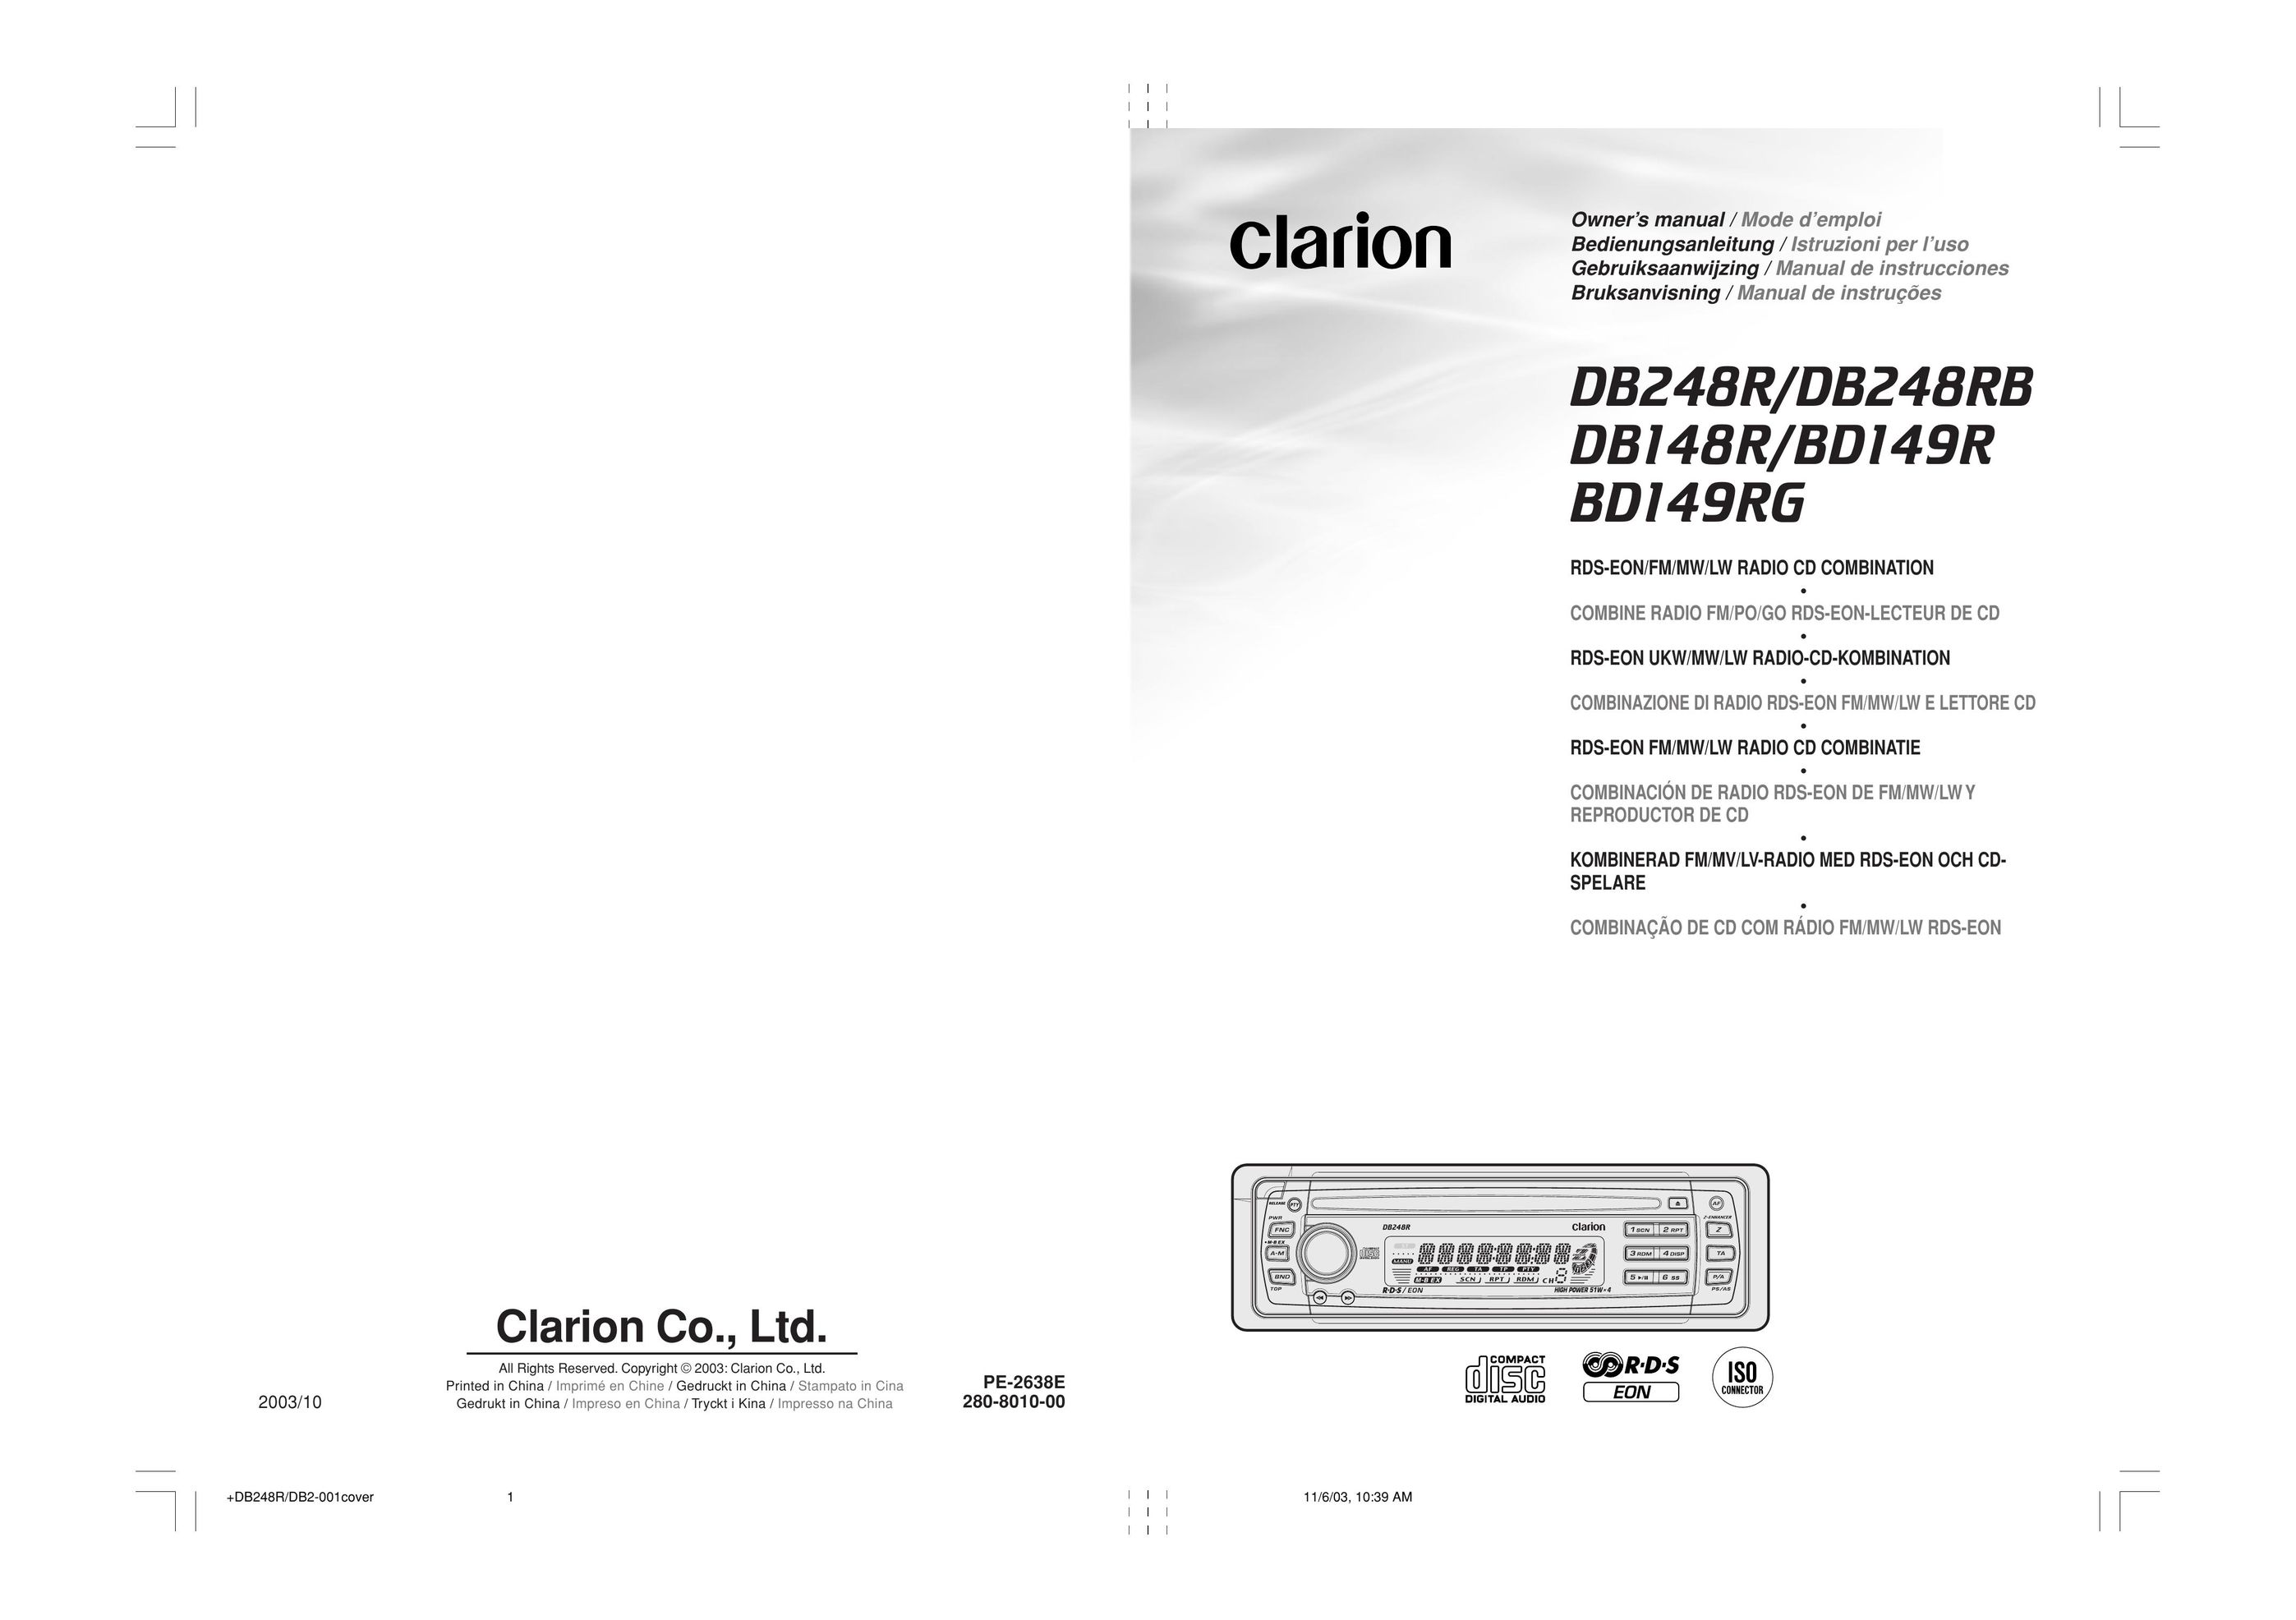 Clarion BD149R Car Stereo System User Manual